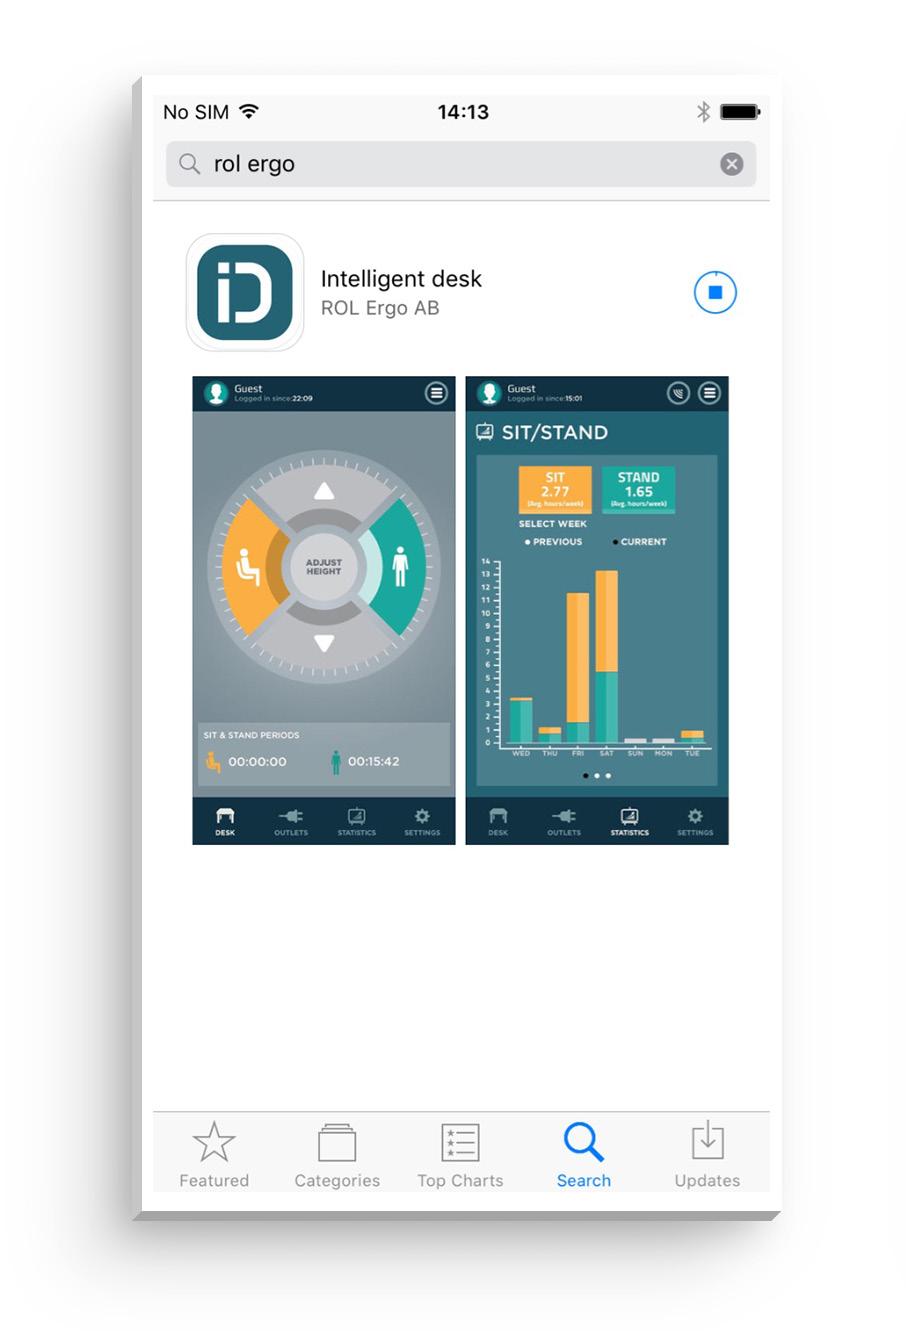 1. GETTING STARTED Your device needs to be connected to the Internet. Download the Intelligent Desk app from App Store or Google Play Store.